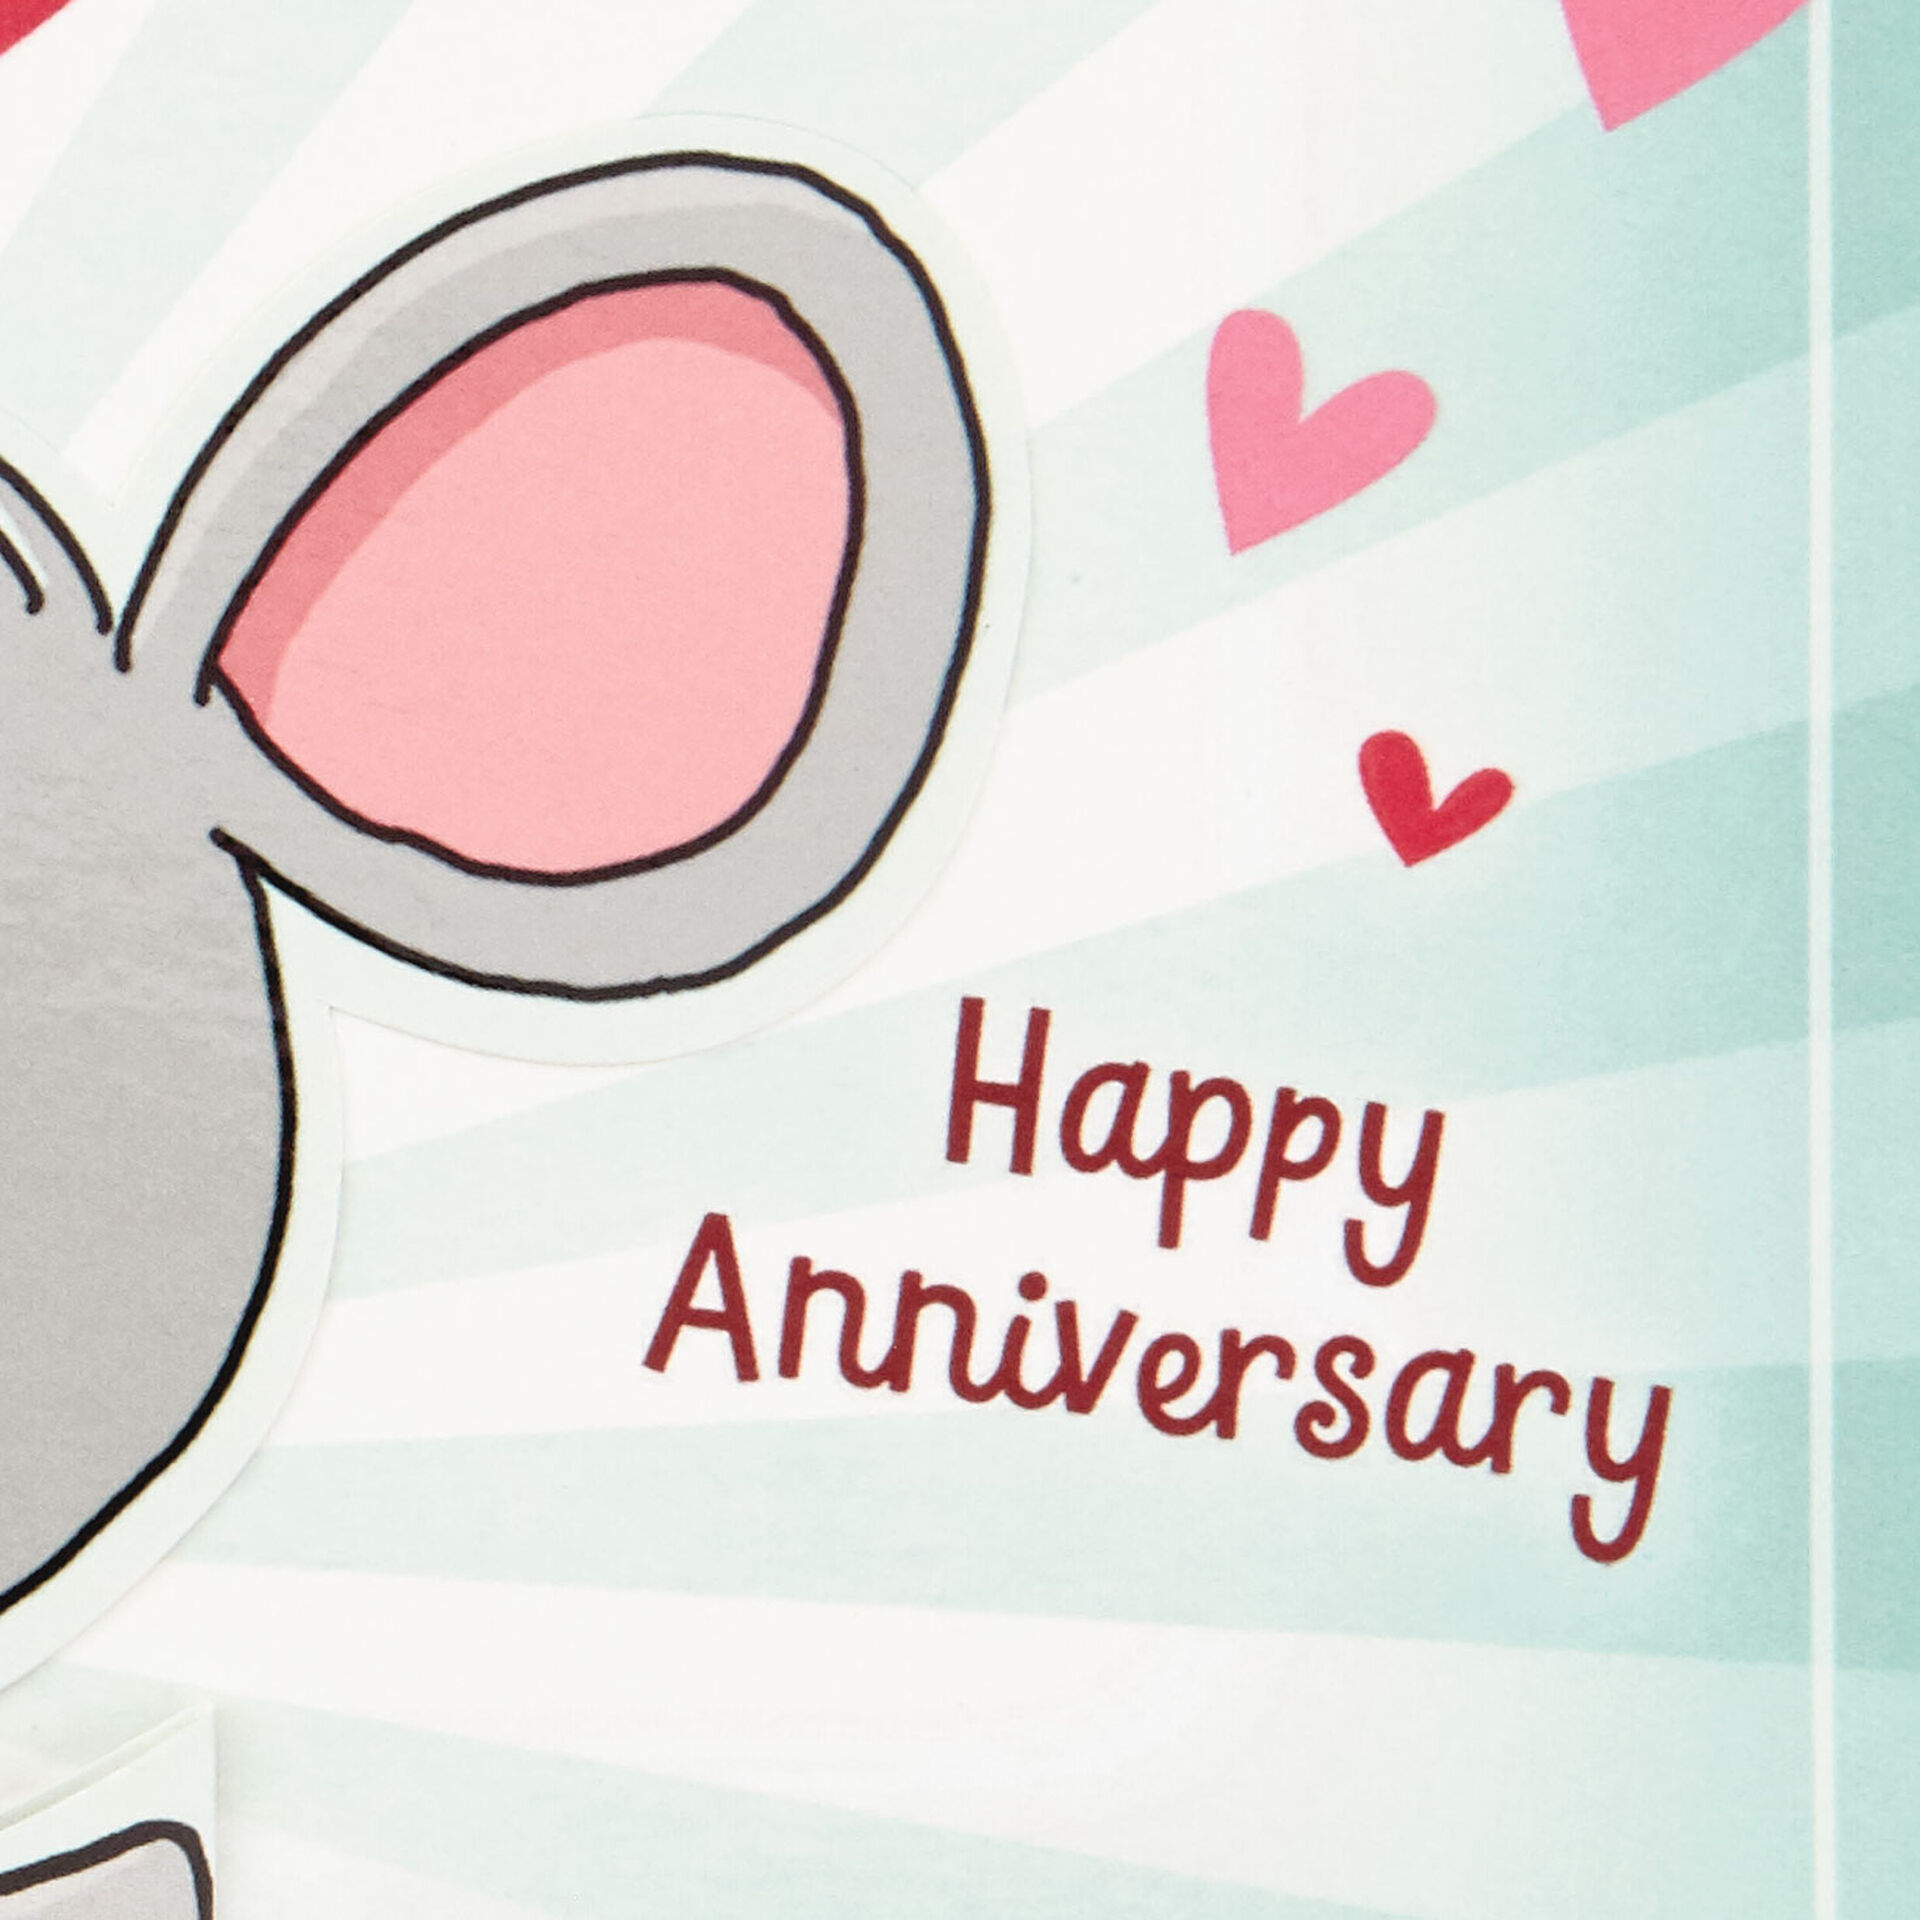 Cute-Mice-PopUp-Anniversary-Card-for-Husband_559AVY2848_02